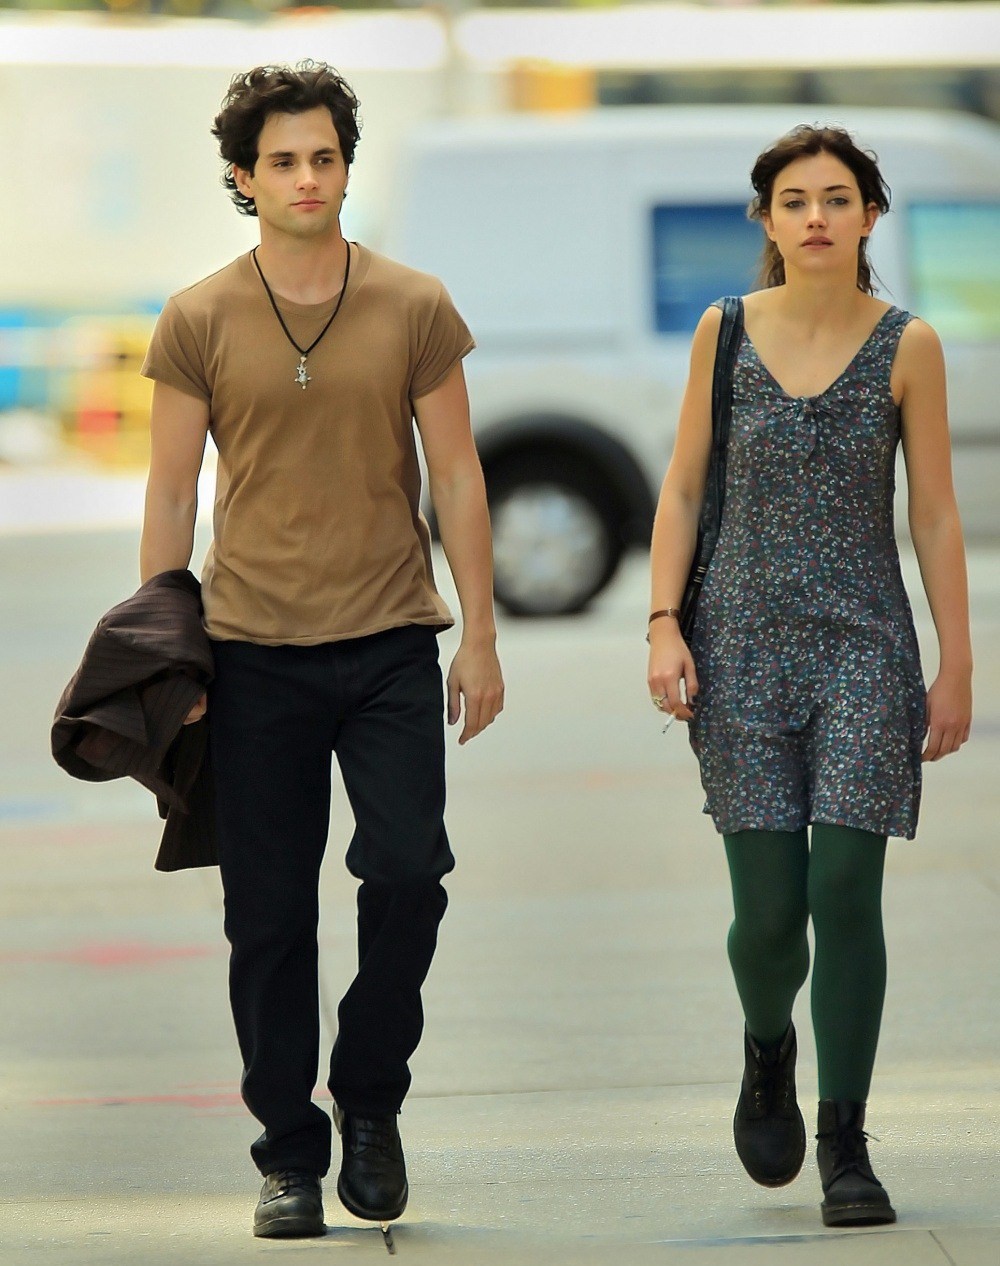 Penn Badgley stars as Jeff Buckley and Imogen Poots stars as Allie in Smuggler Films' Greetings from Tim Buckley (2013)